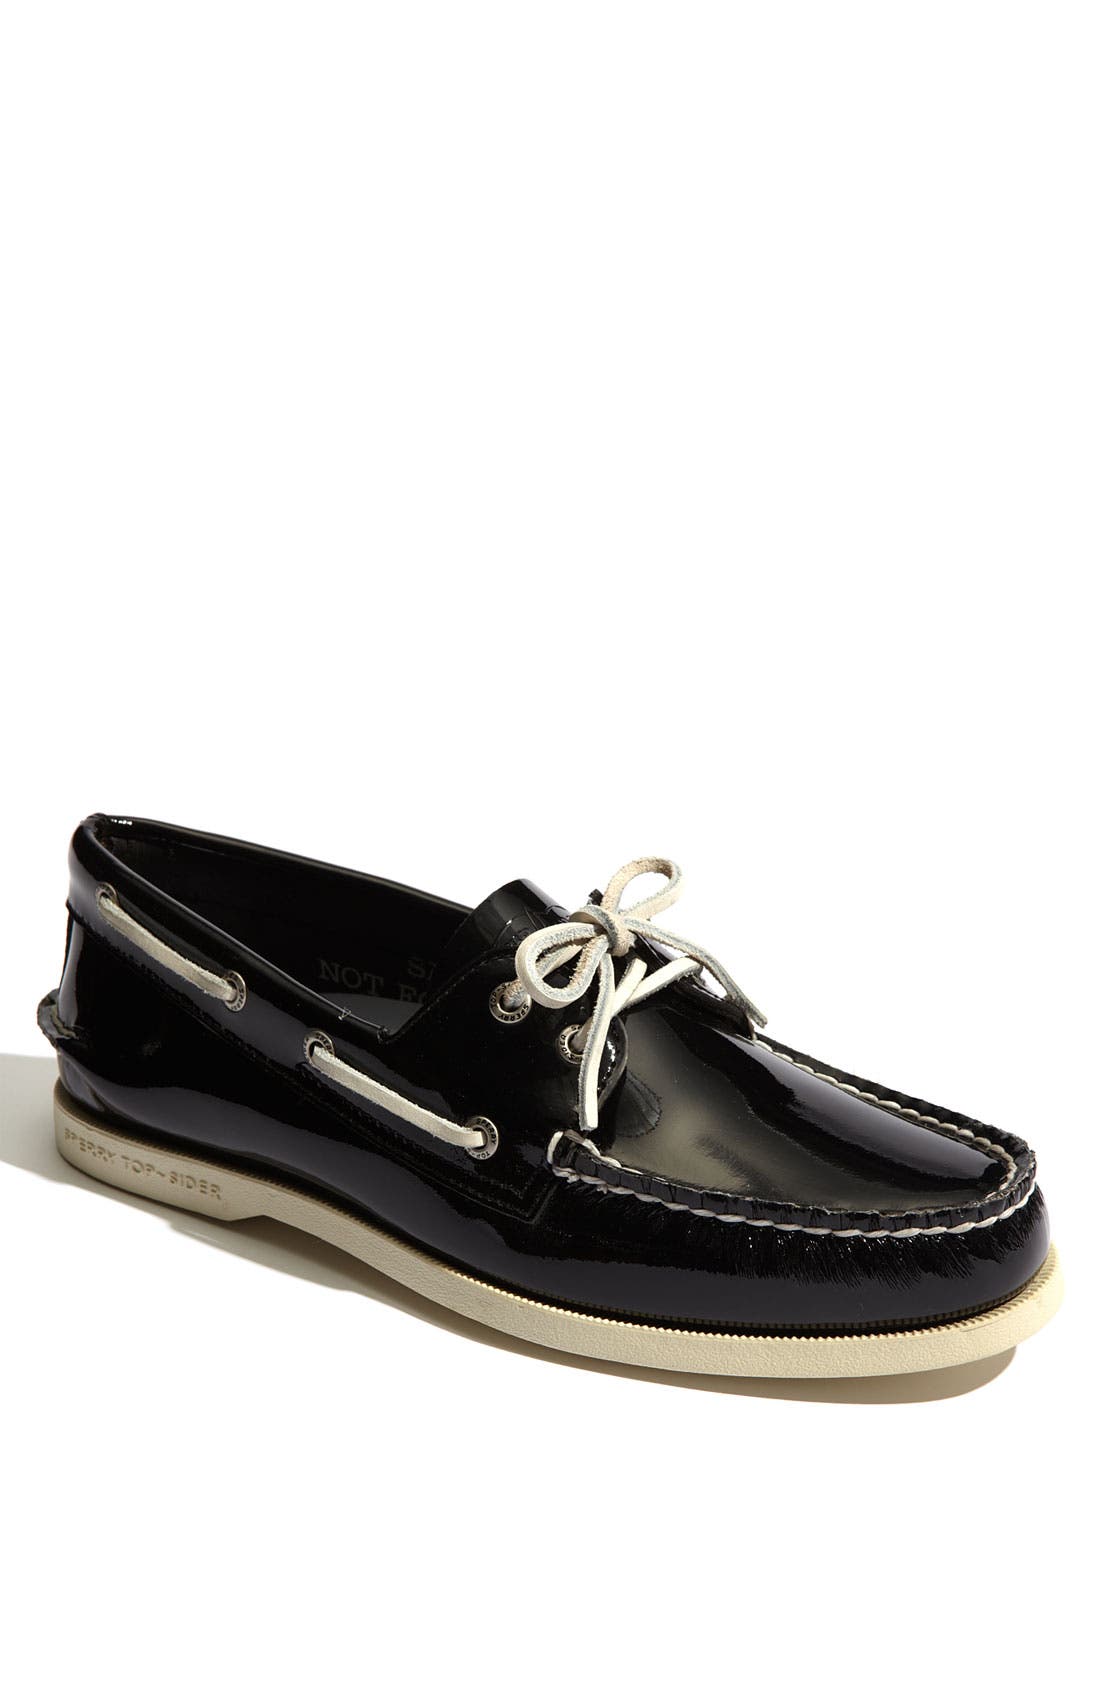 leather sperry top sider